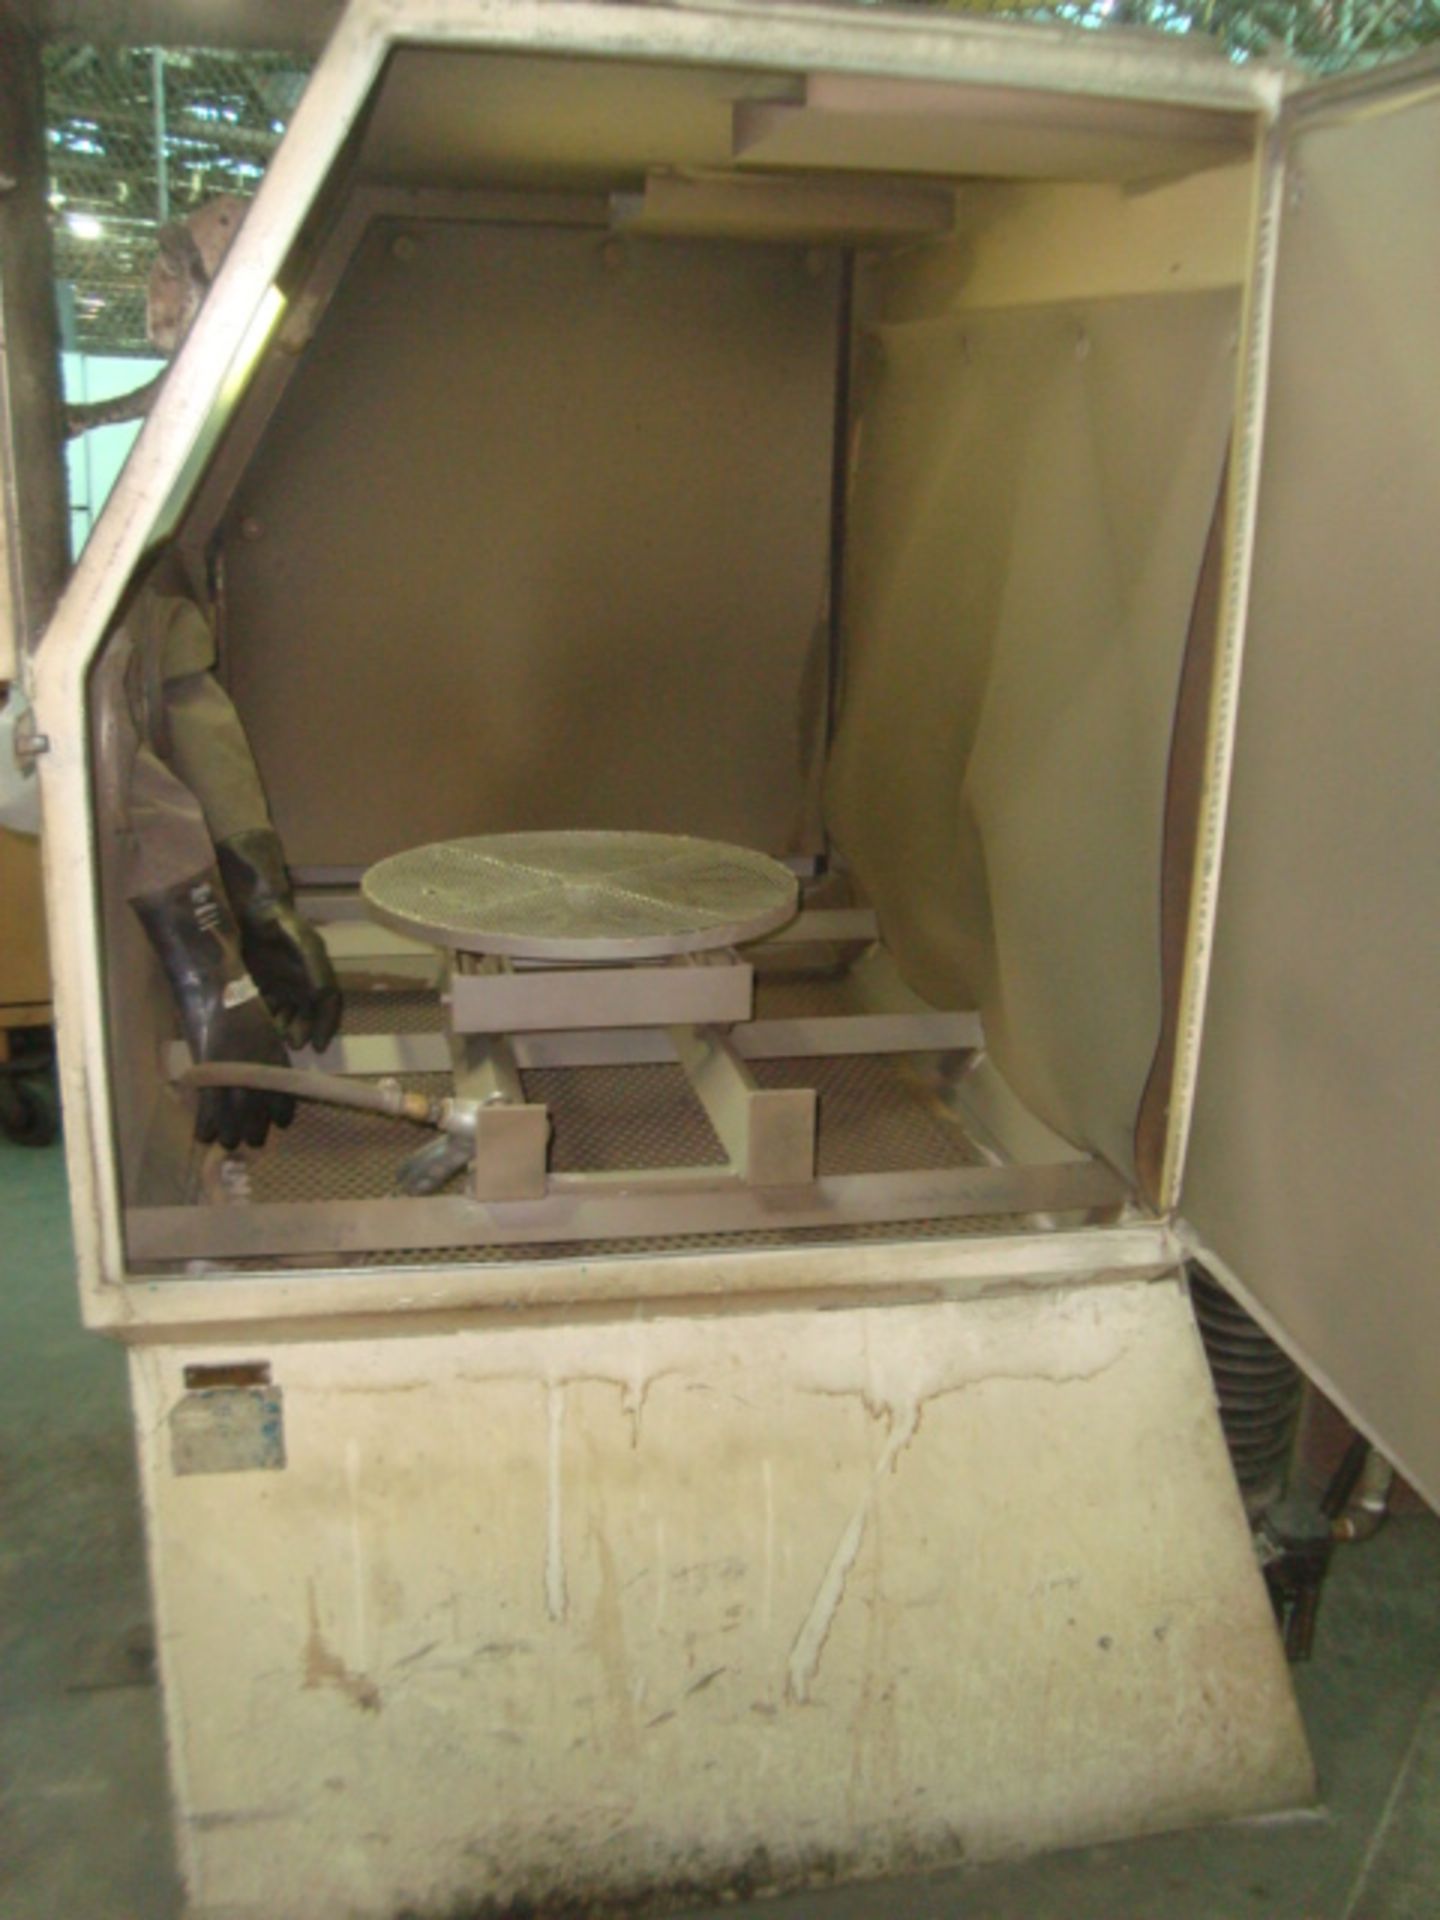 Clemco Model BNP 220-3 2-Glove Bead Blasting Cabinet With Swing Out Access Doors On Left & Right - Image 4 of 13